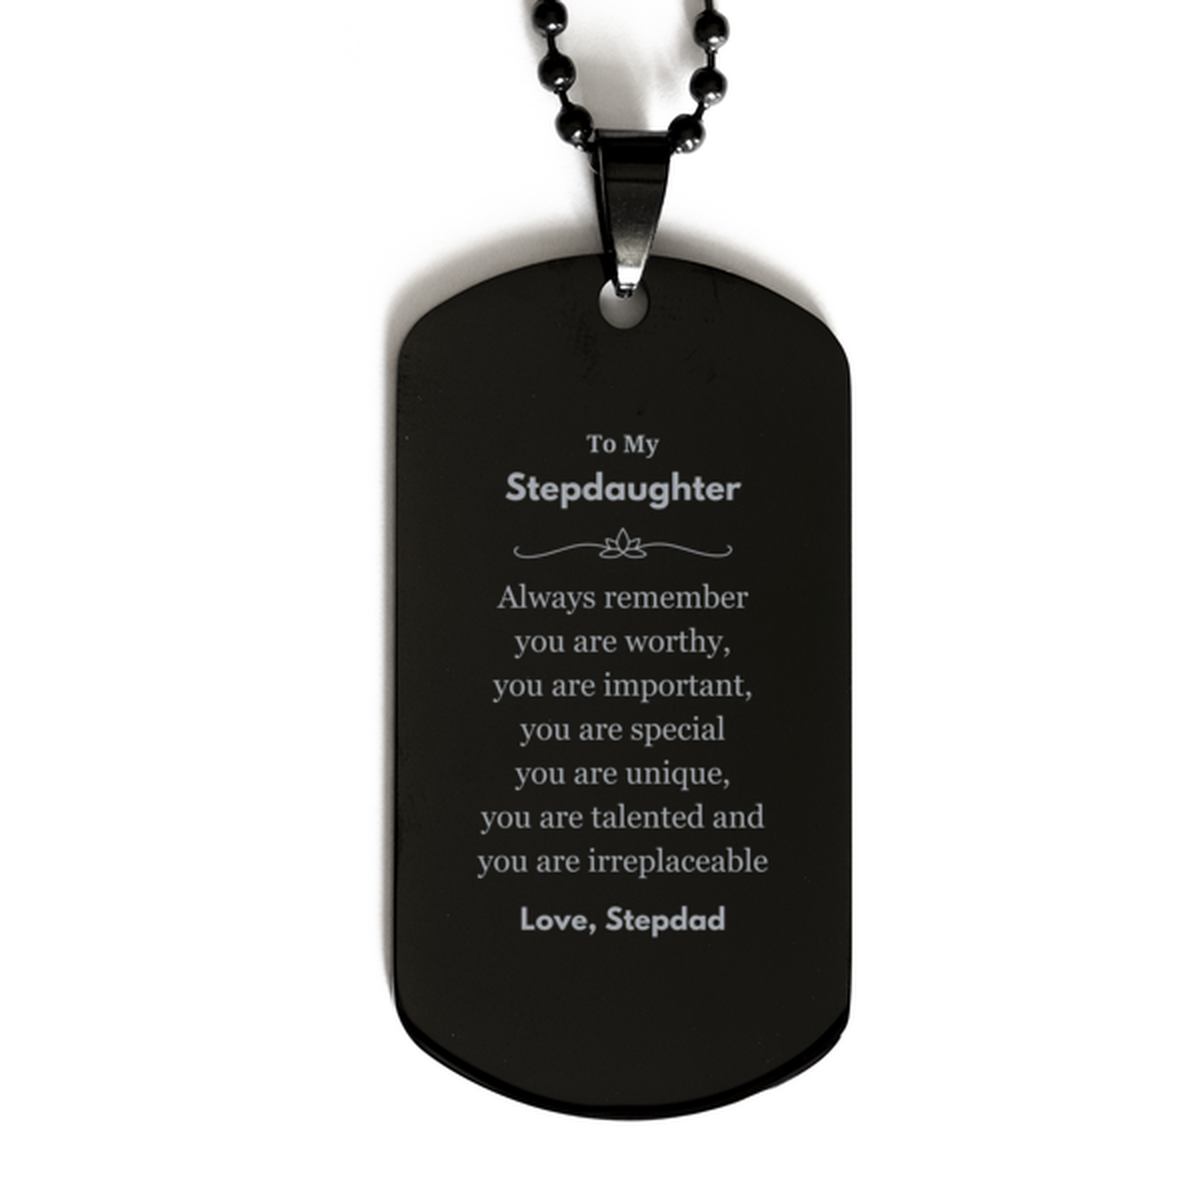 Stepdaughter Birthday Gifts from Stepdad, Inspirational Black Dog Tag for Stepdaughter Christmas Graduation Gifts for Stepdaughter Always remember you are worthy, you are important. Love, Stepdad